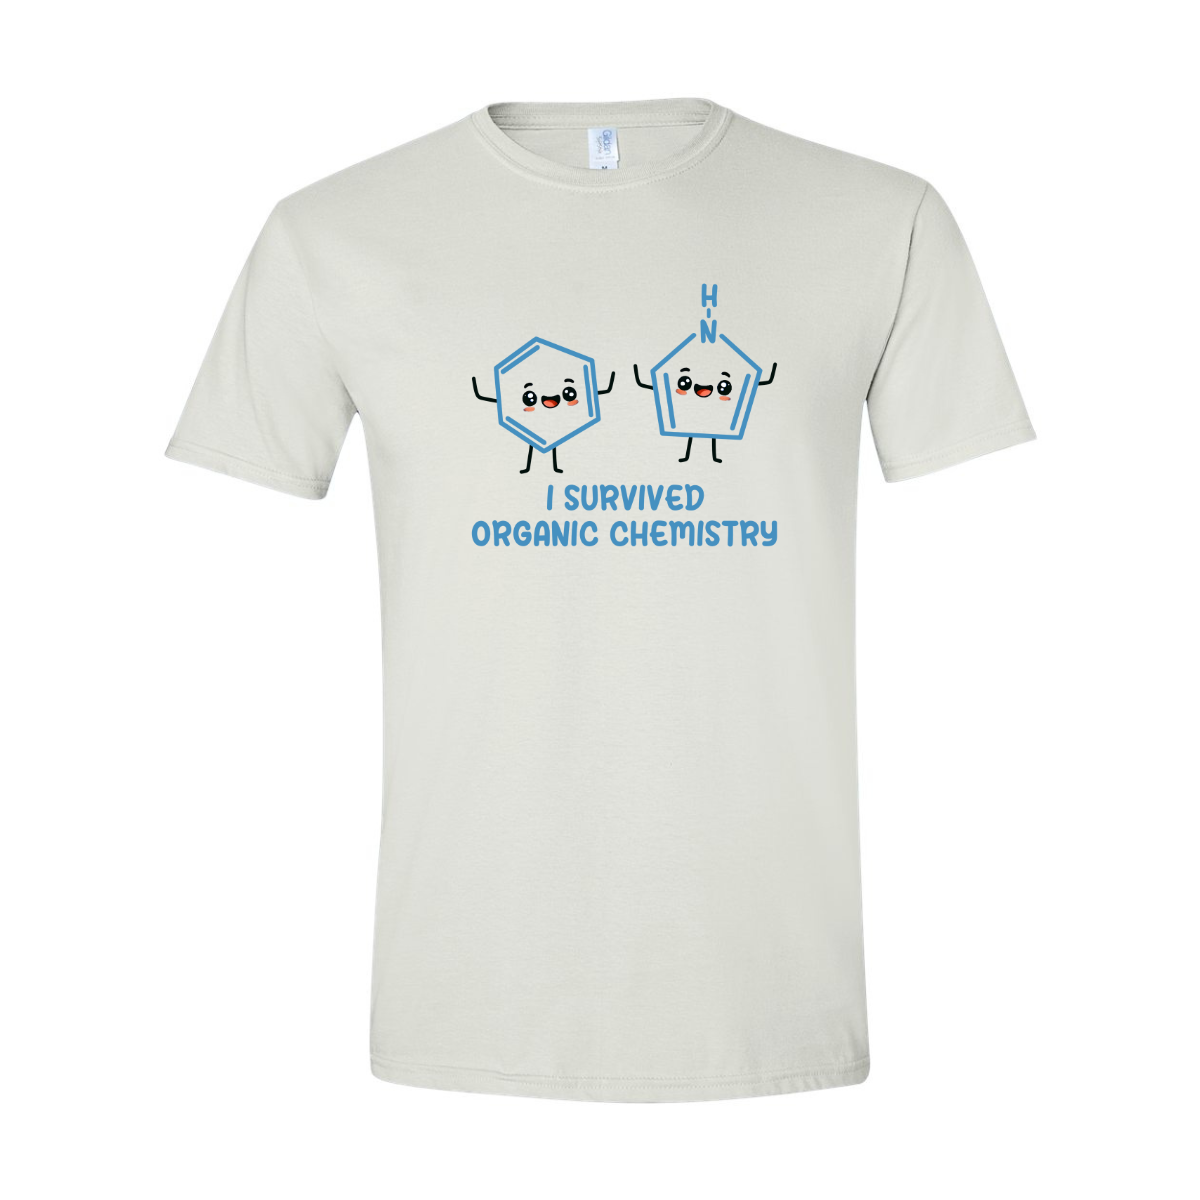 ADULT Unisex T-Shirt CHEA015 I SURVIVED ORGANIC CHEMISTRY